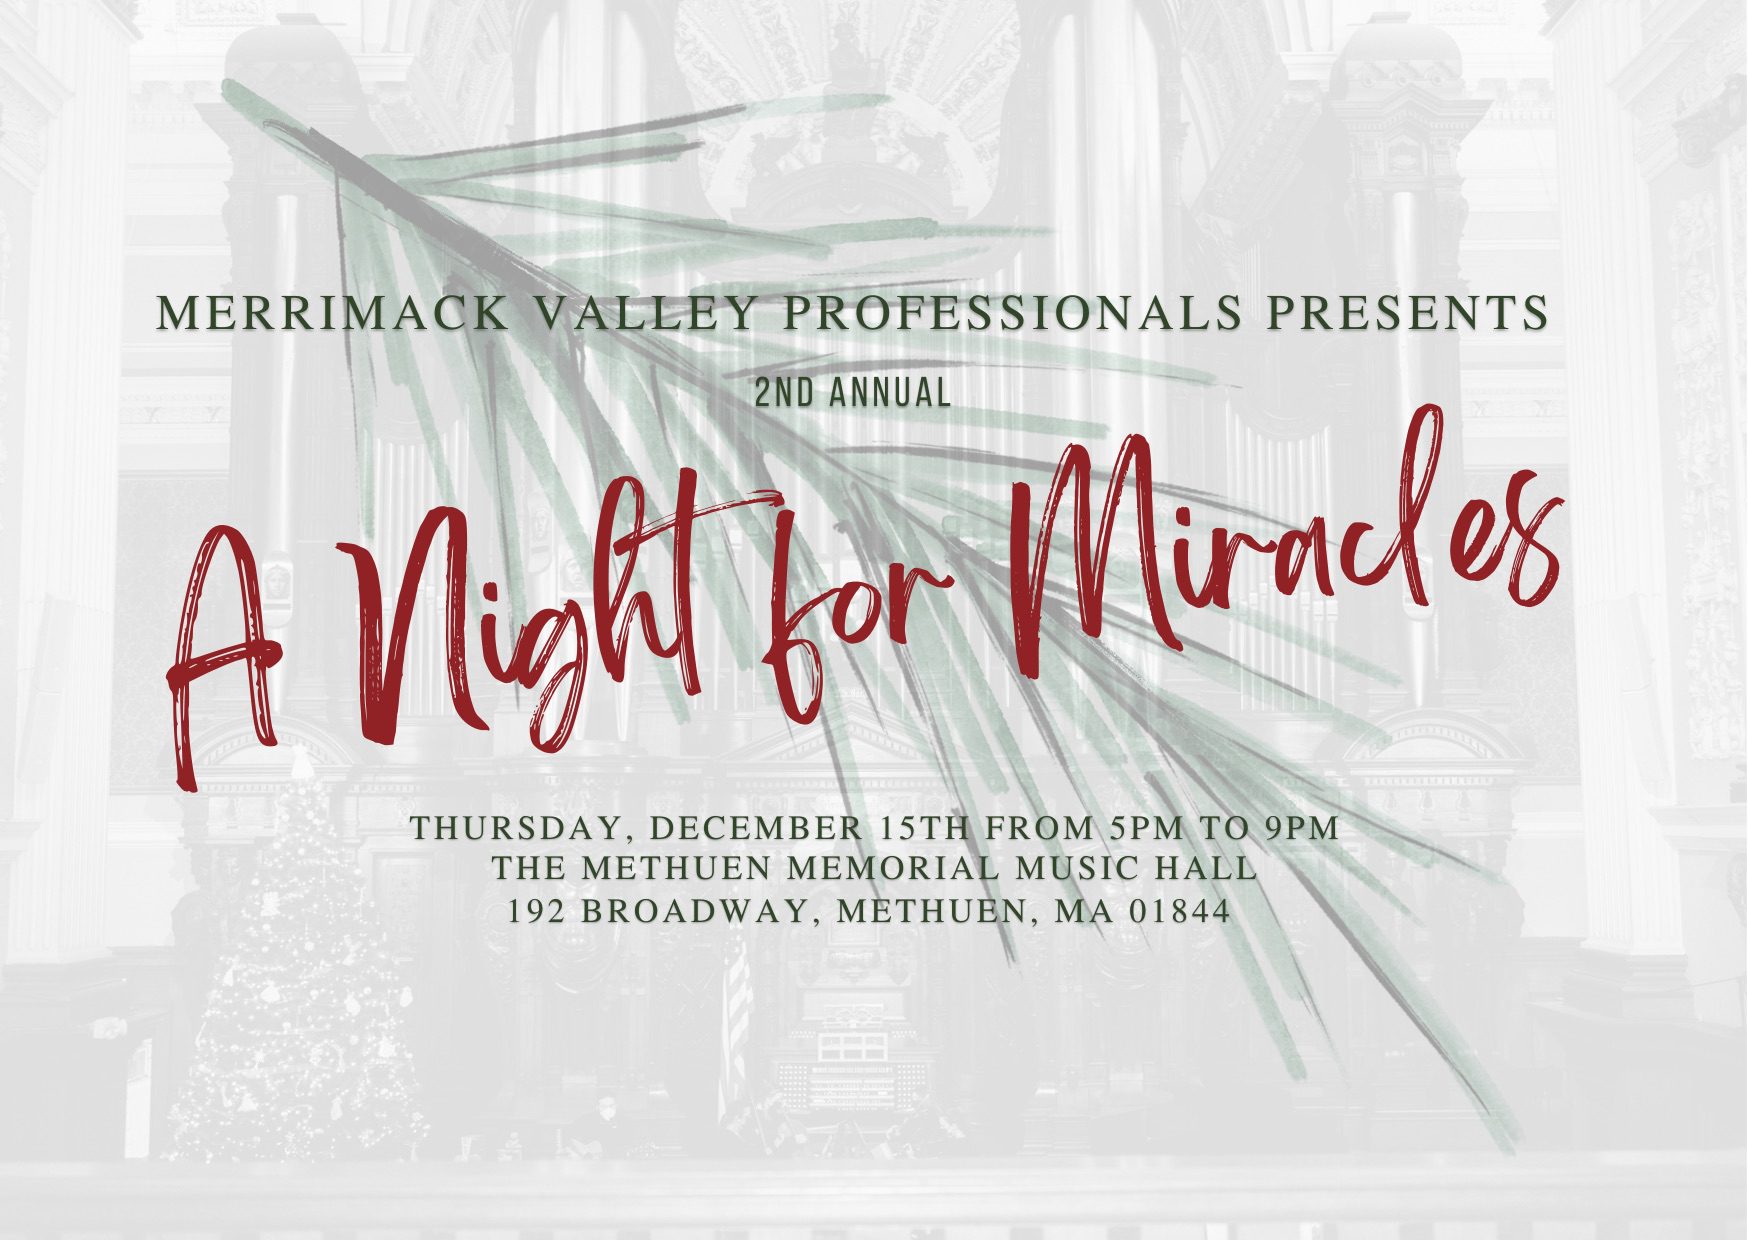 2nd Annual: A Night for Miracles